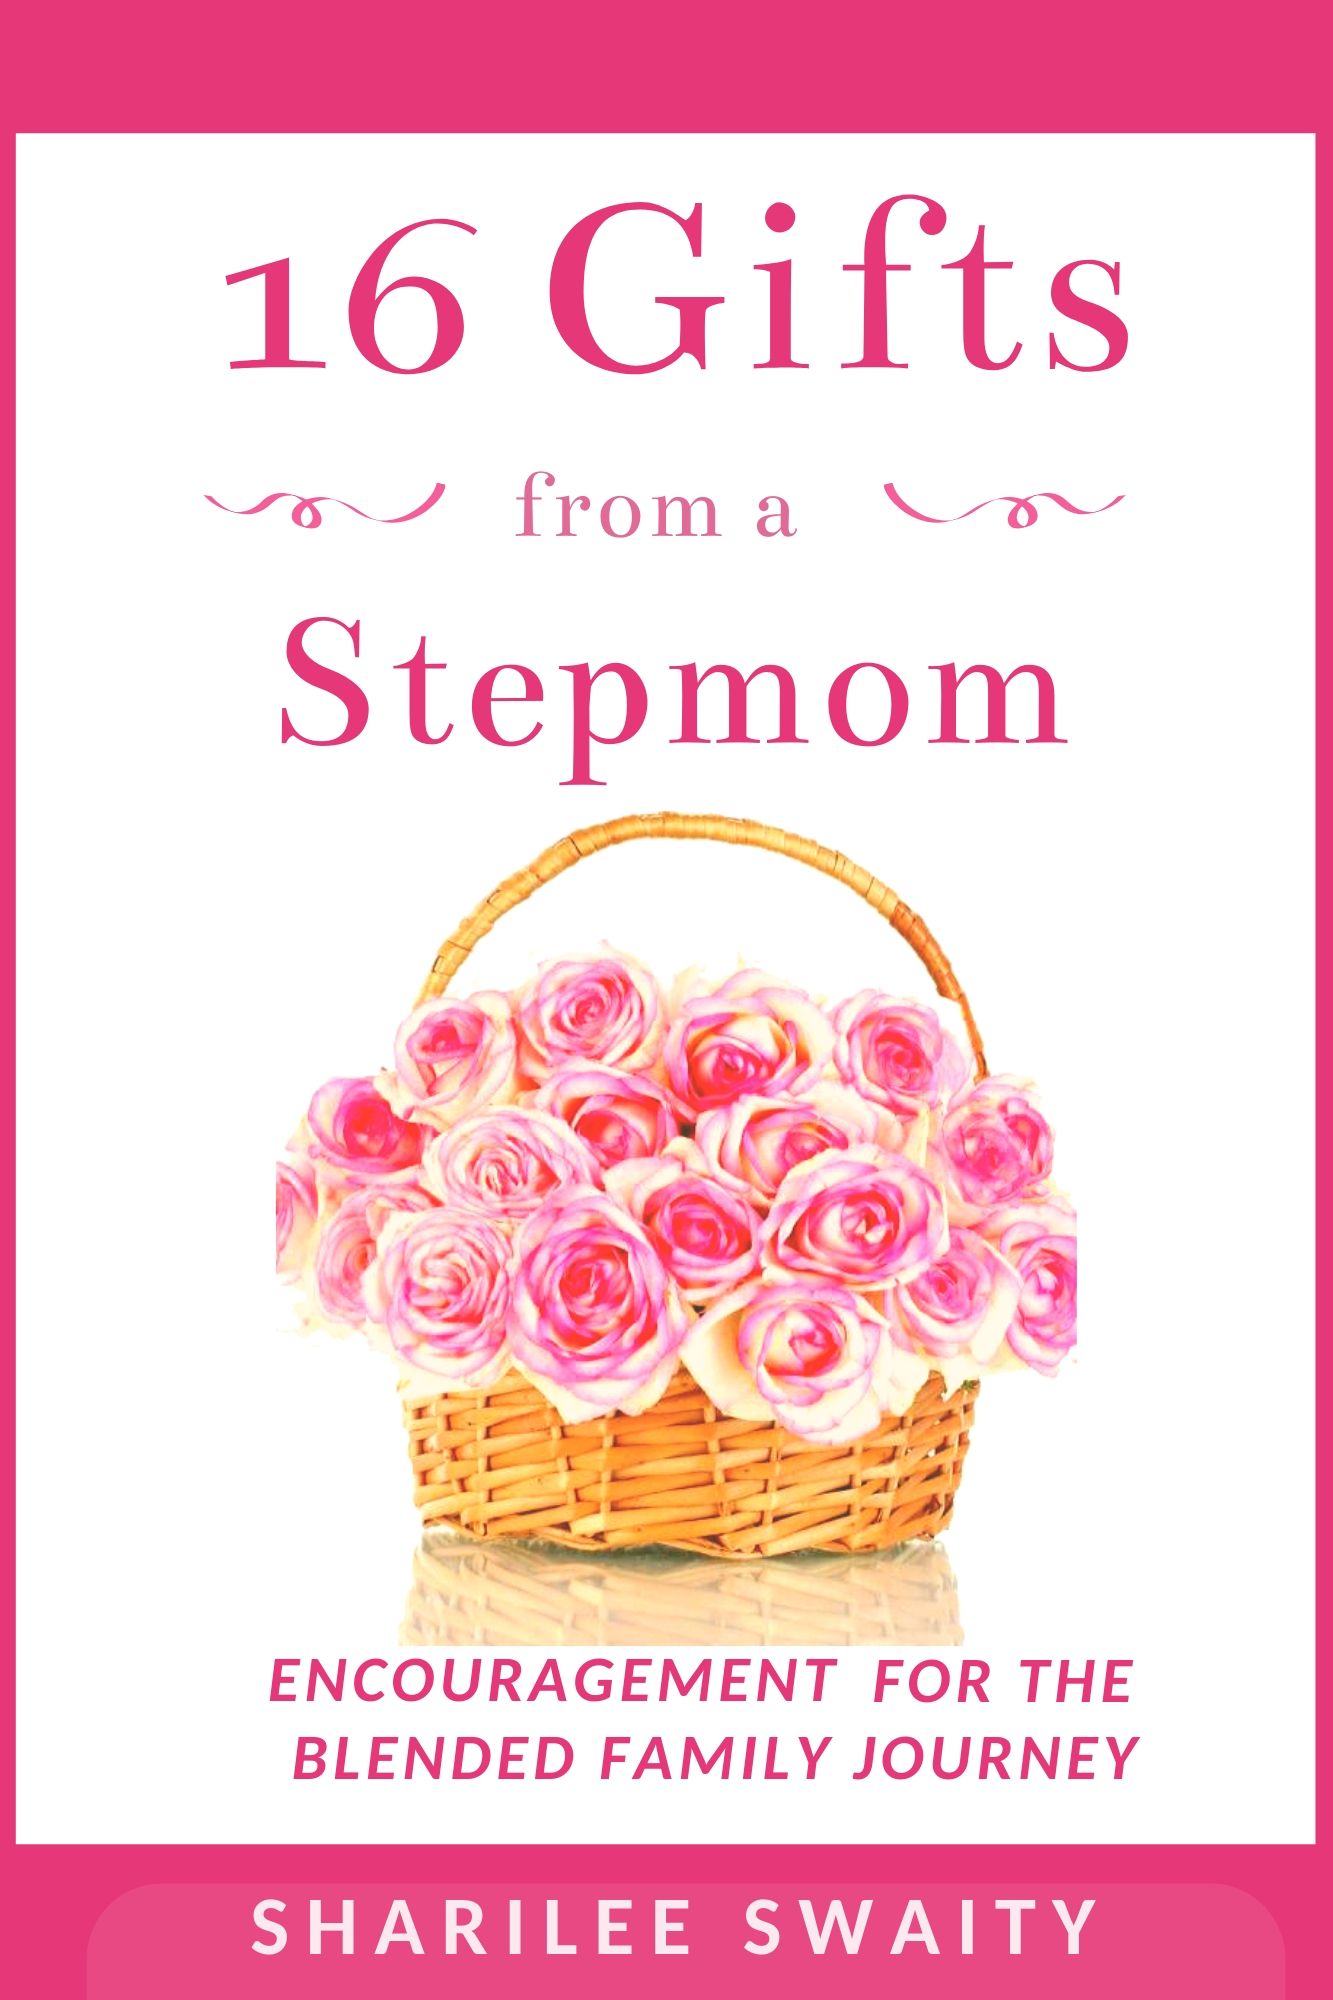 16 Gifts From A Stepmom: Encouragement for the Blended Family Journey by Sharilee Swaity